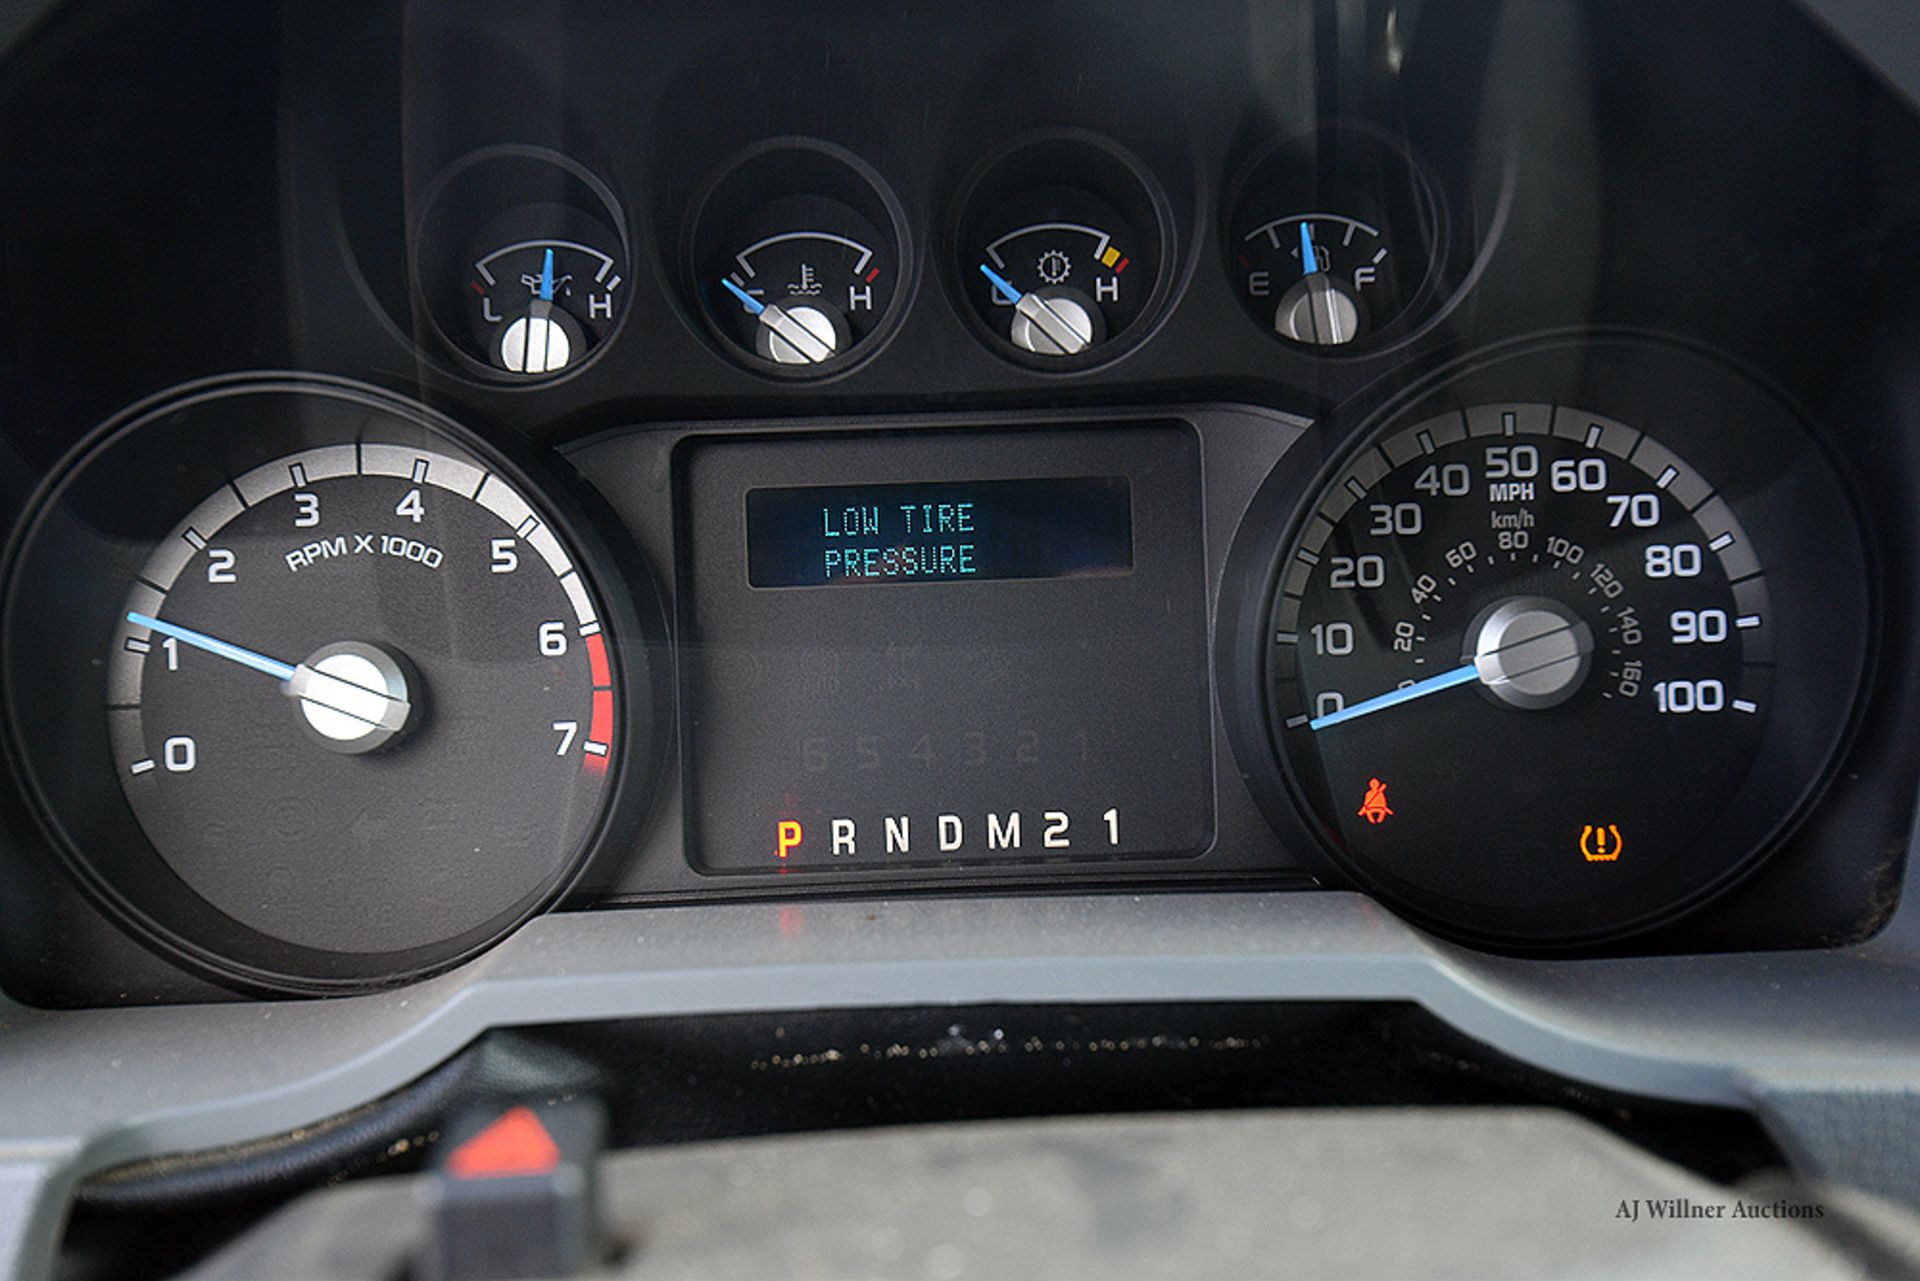 2012 Ford F-250 Super Duty Super Cab Utility Truck 92,764 Miles w/ Auto Trans and 6.2L V8 - Image 6 of 7